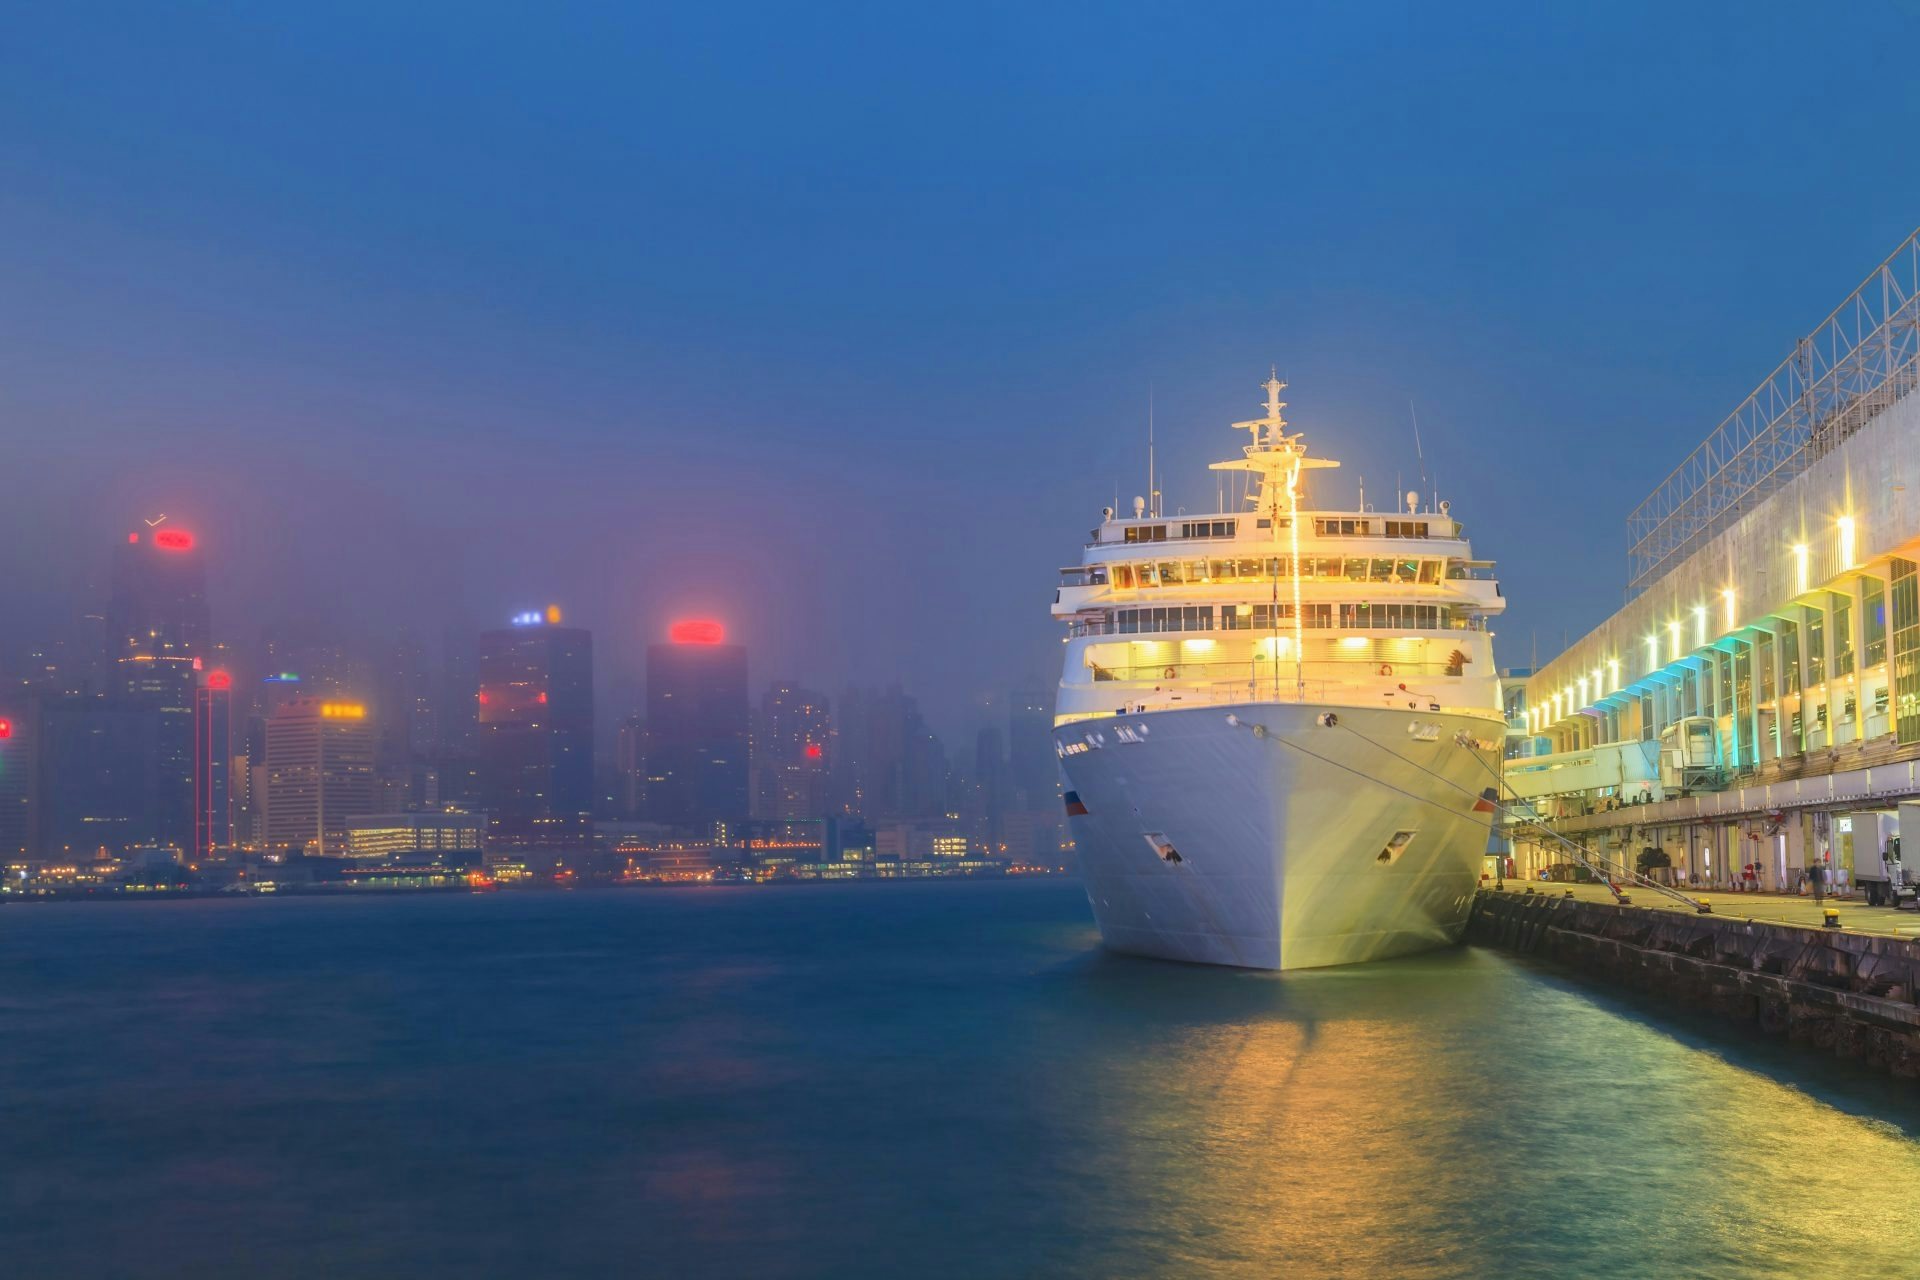 HNA Group is believed to consider acquiring a major cruise line to reenter the Chinese cruise market. (Shutterstock)